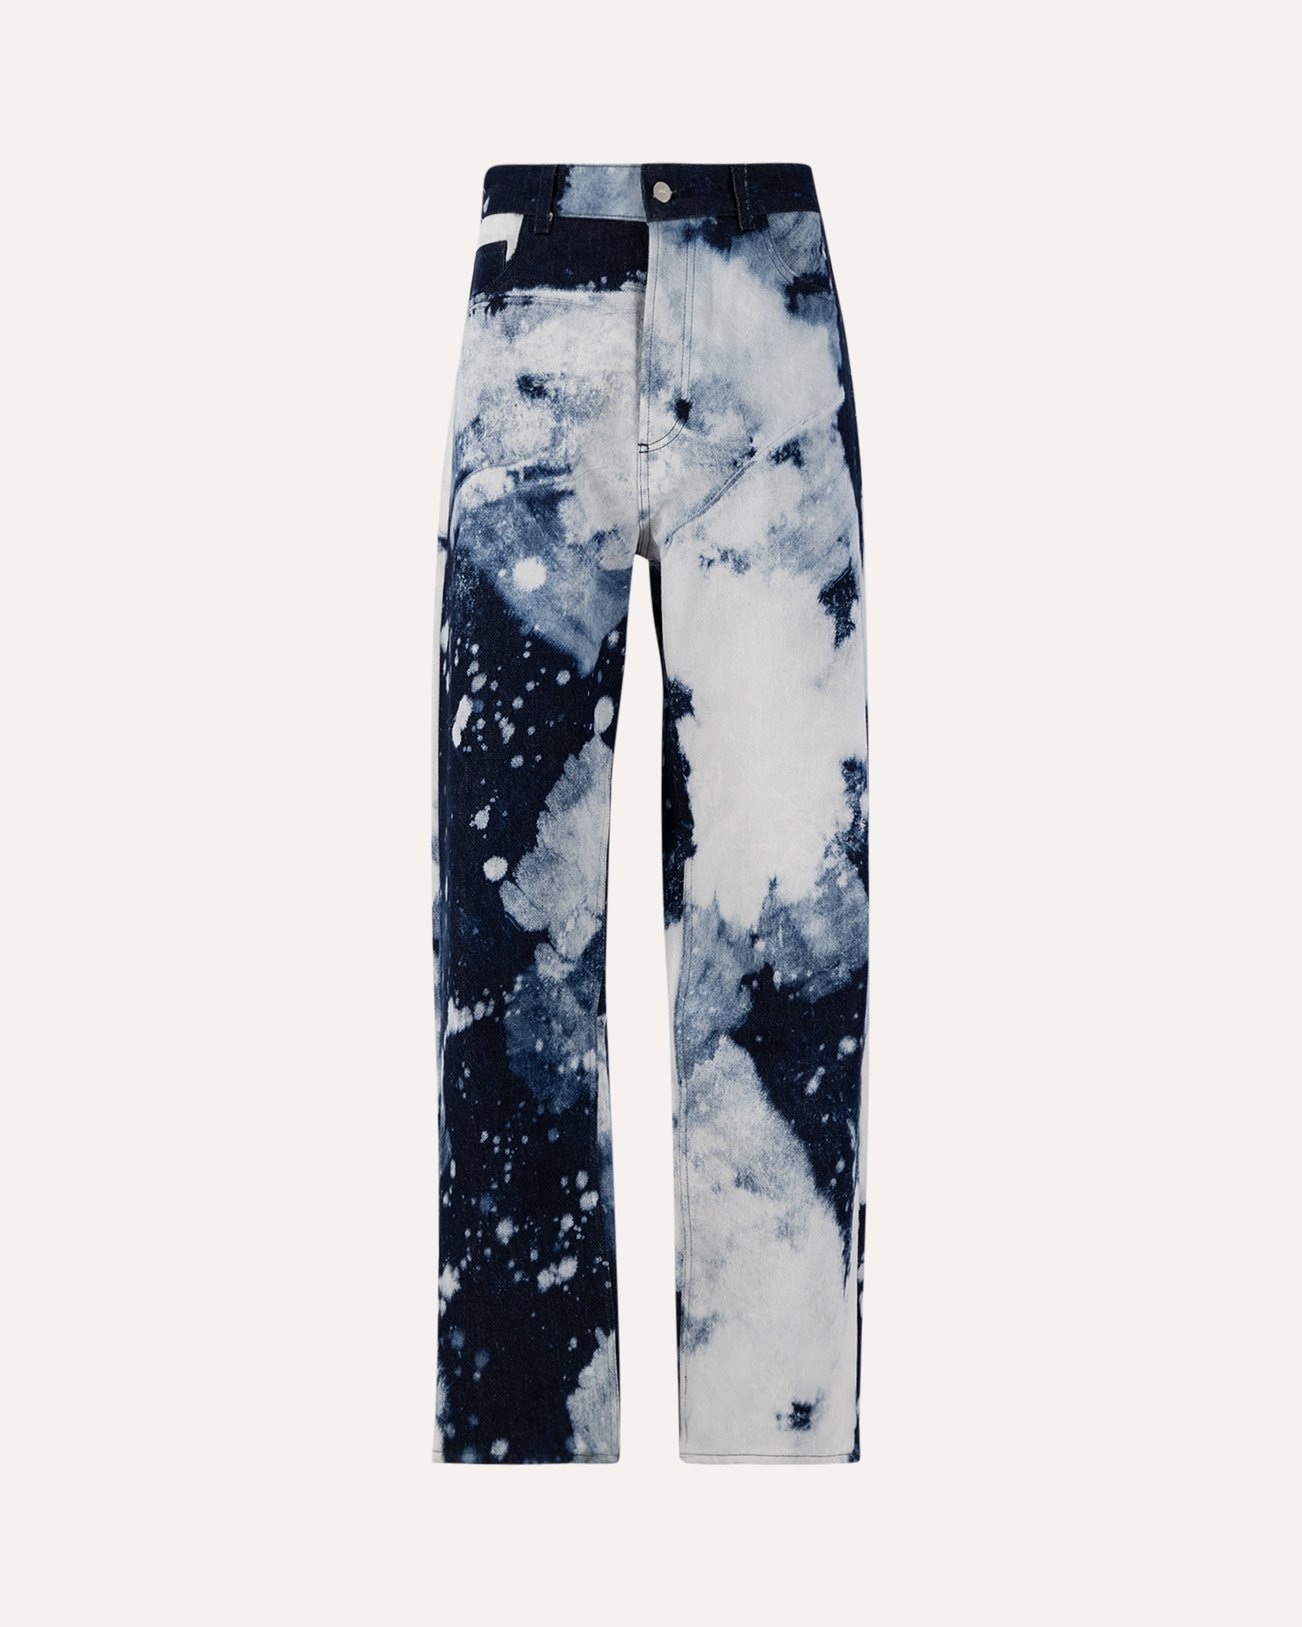 A-COLD-WALL* Hand Bleached Wide Leg Jean BLACK 1